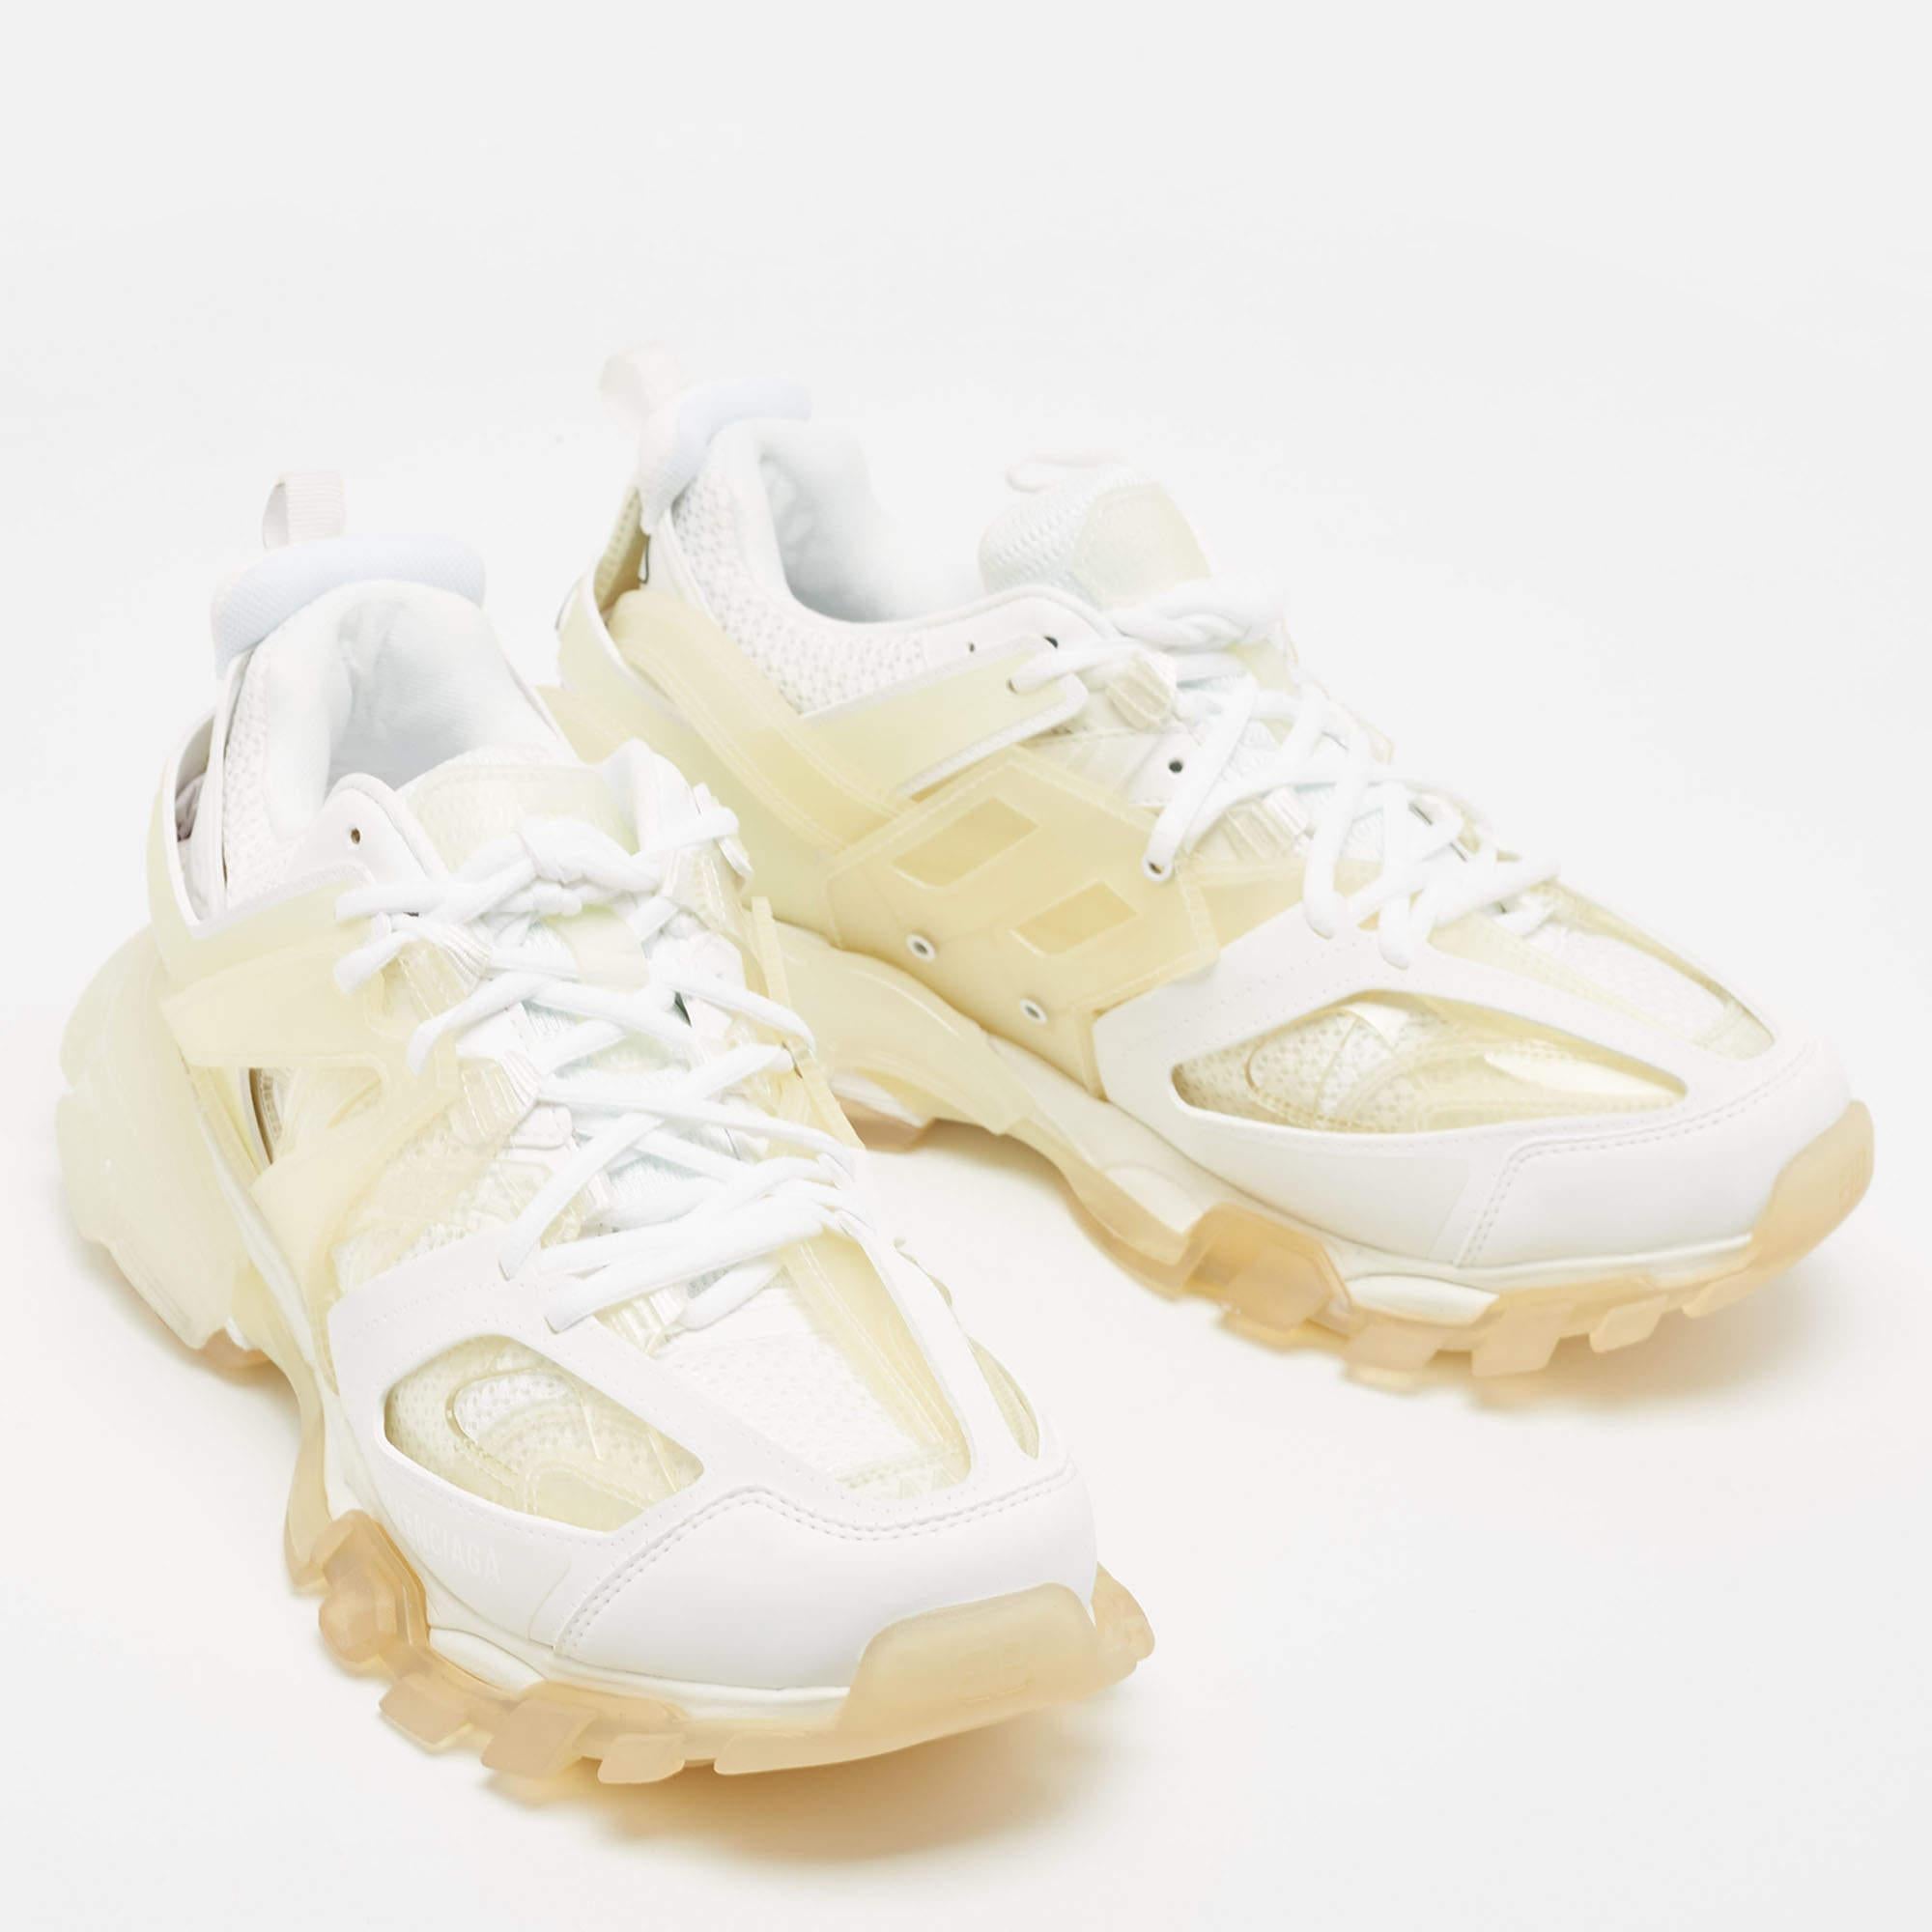 Packed with style and comfort, these Balenciaga sneakers are gentle on the feet so that you can glide through the day. They have a sleek upper with lace closure, and they're set on durable rubber soles.

